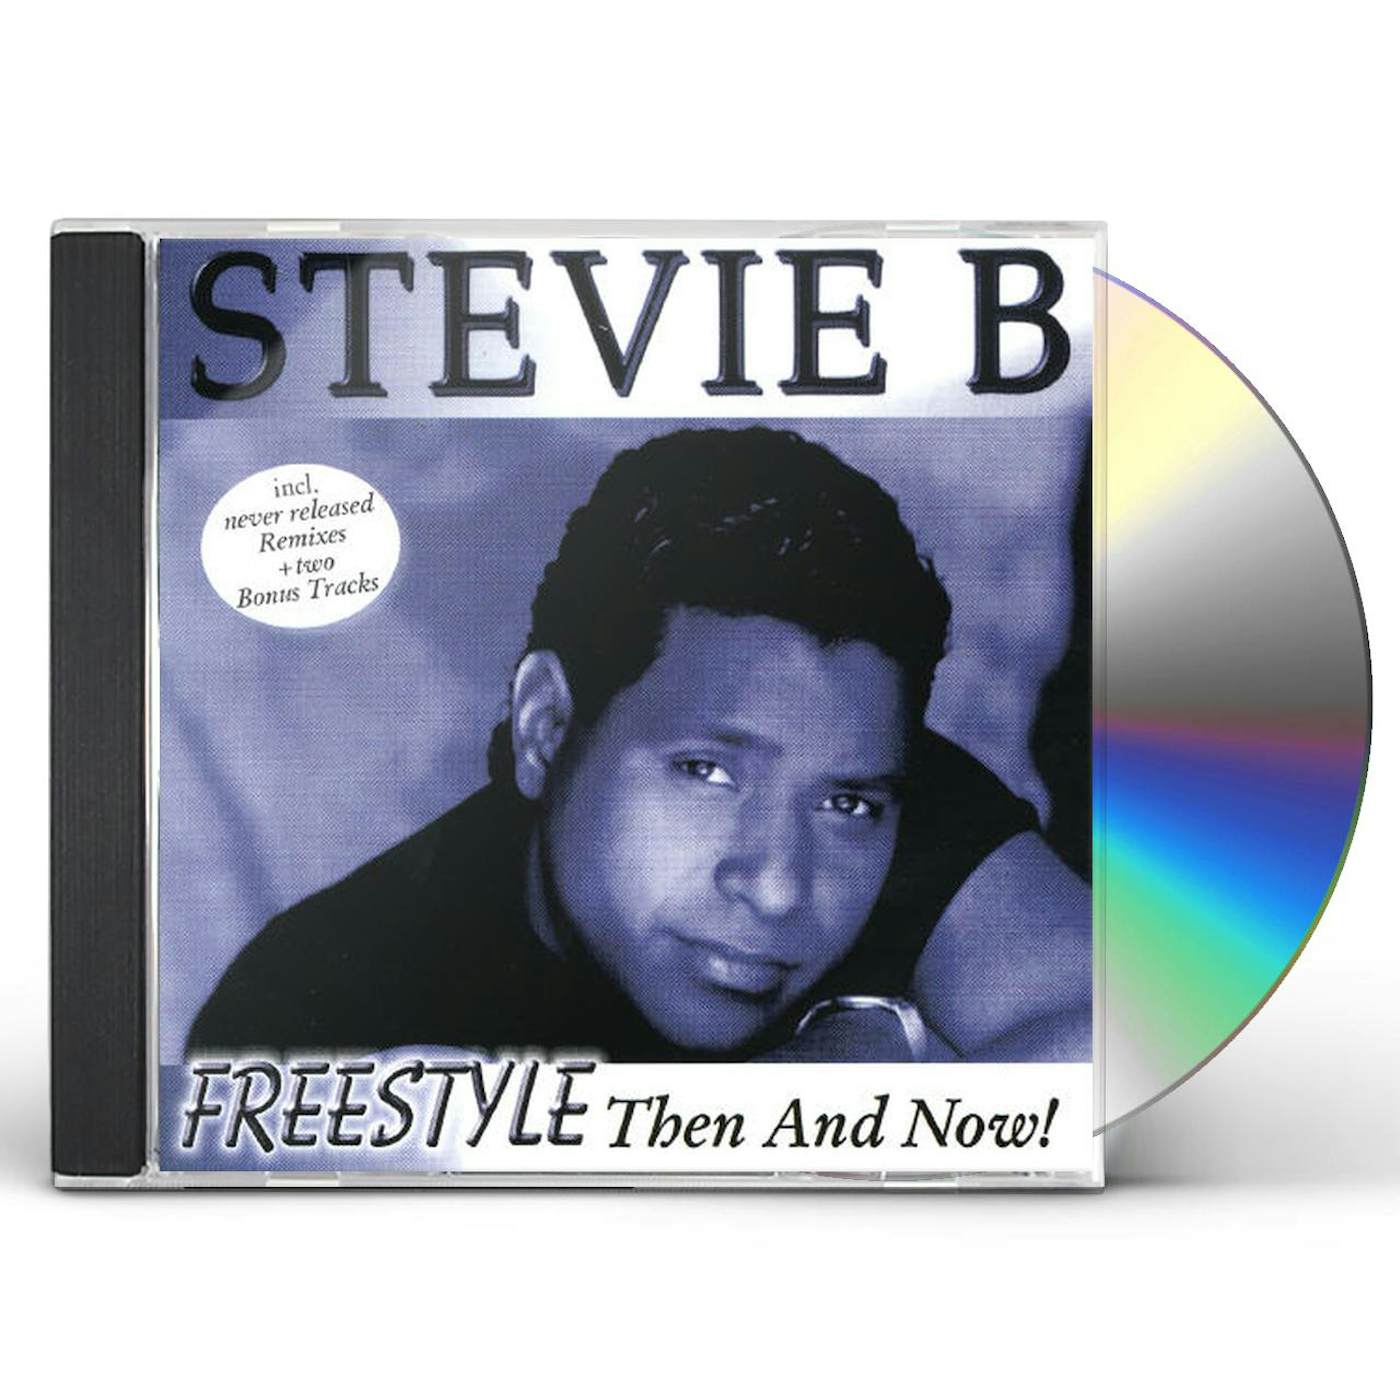 Stevie B FREESTYLE: THEN & NOW CD